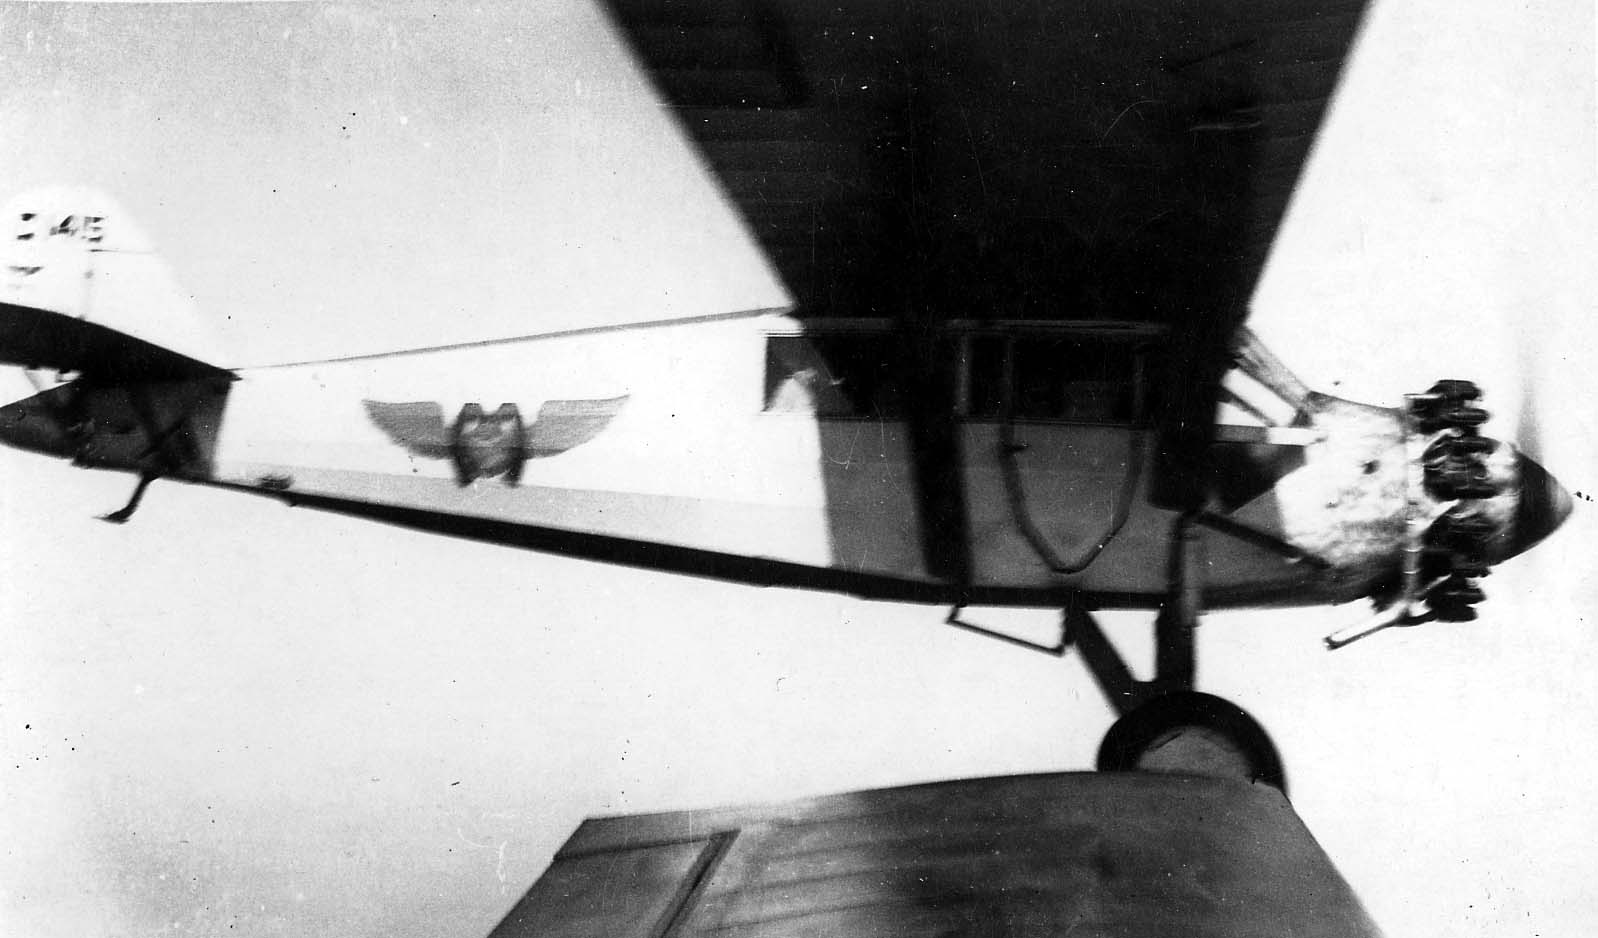 Very close vintage photograph of Mahoney-Ryan B-1 Brougham designed by Donald Hall while in flight over San Diego, California in 1929. Photograph taken by Donald Hall in his Hall X-1.